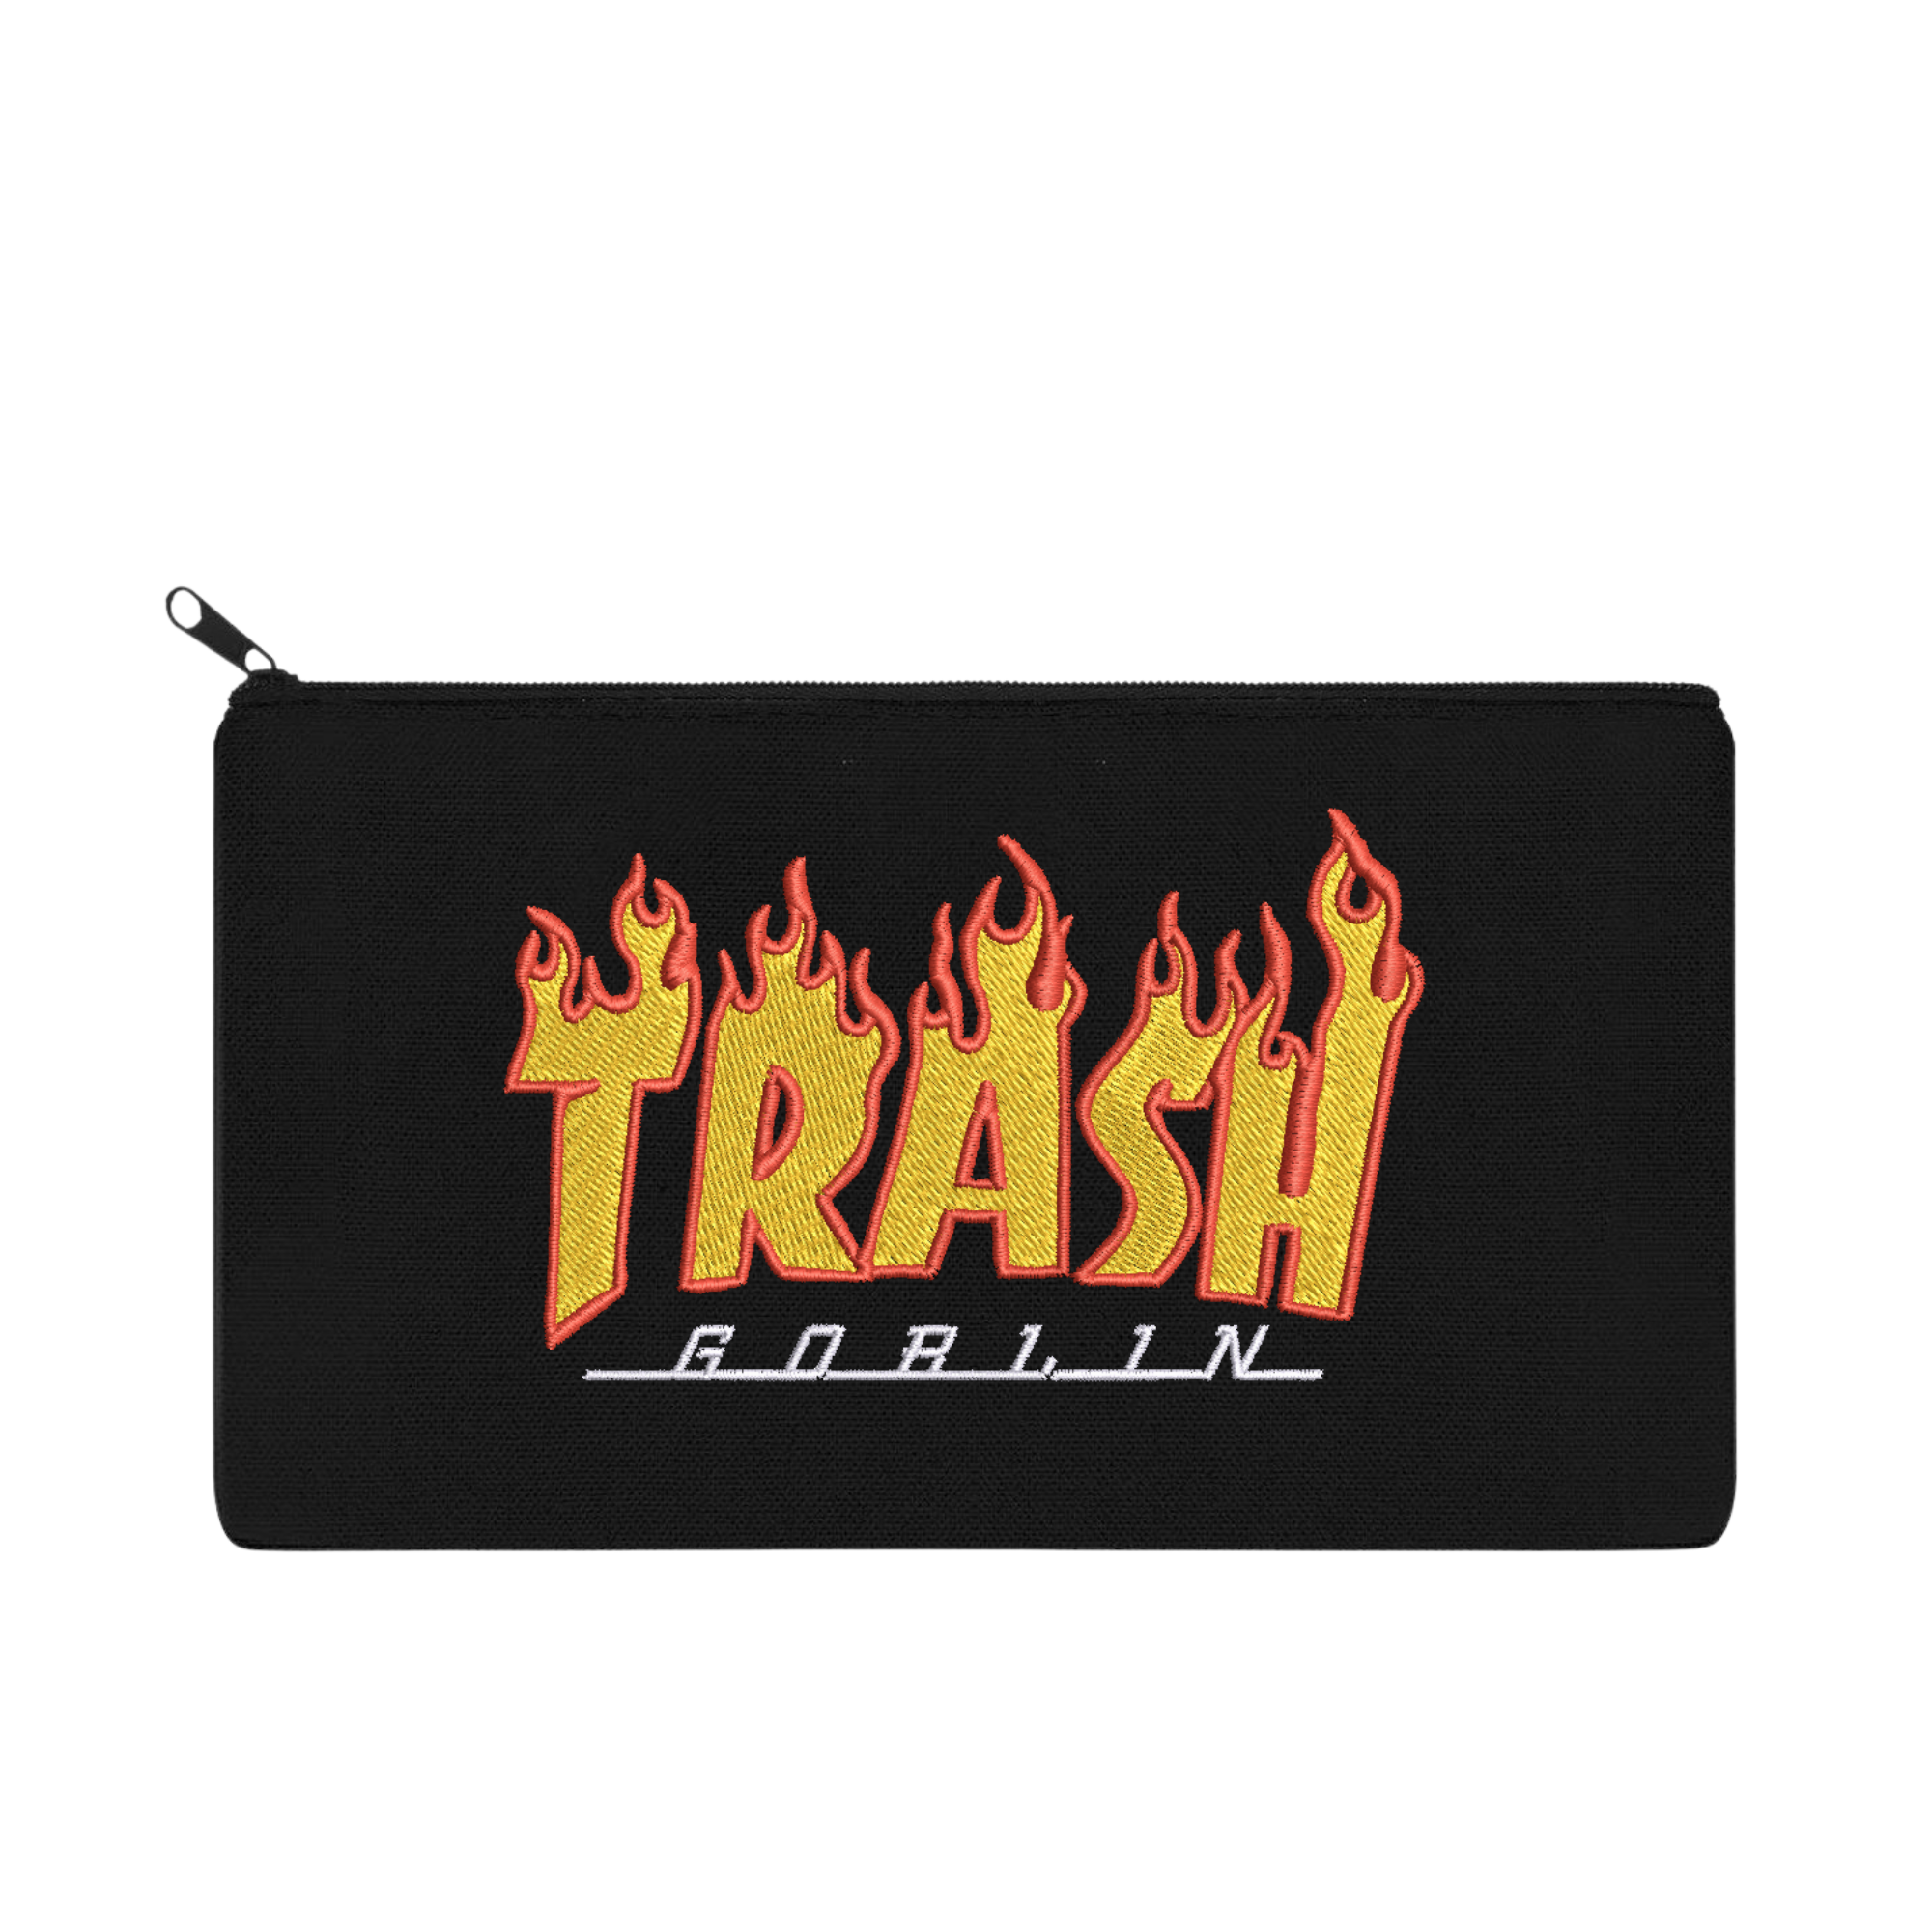 Trash Goblin Flame Font Embroidered Multipurpose Zipper Pouch Bag